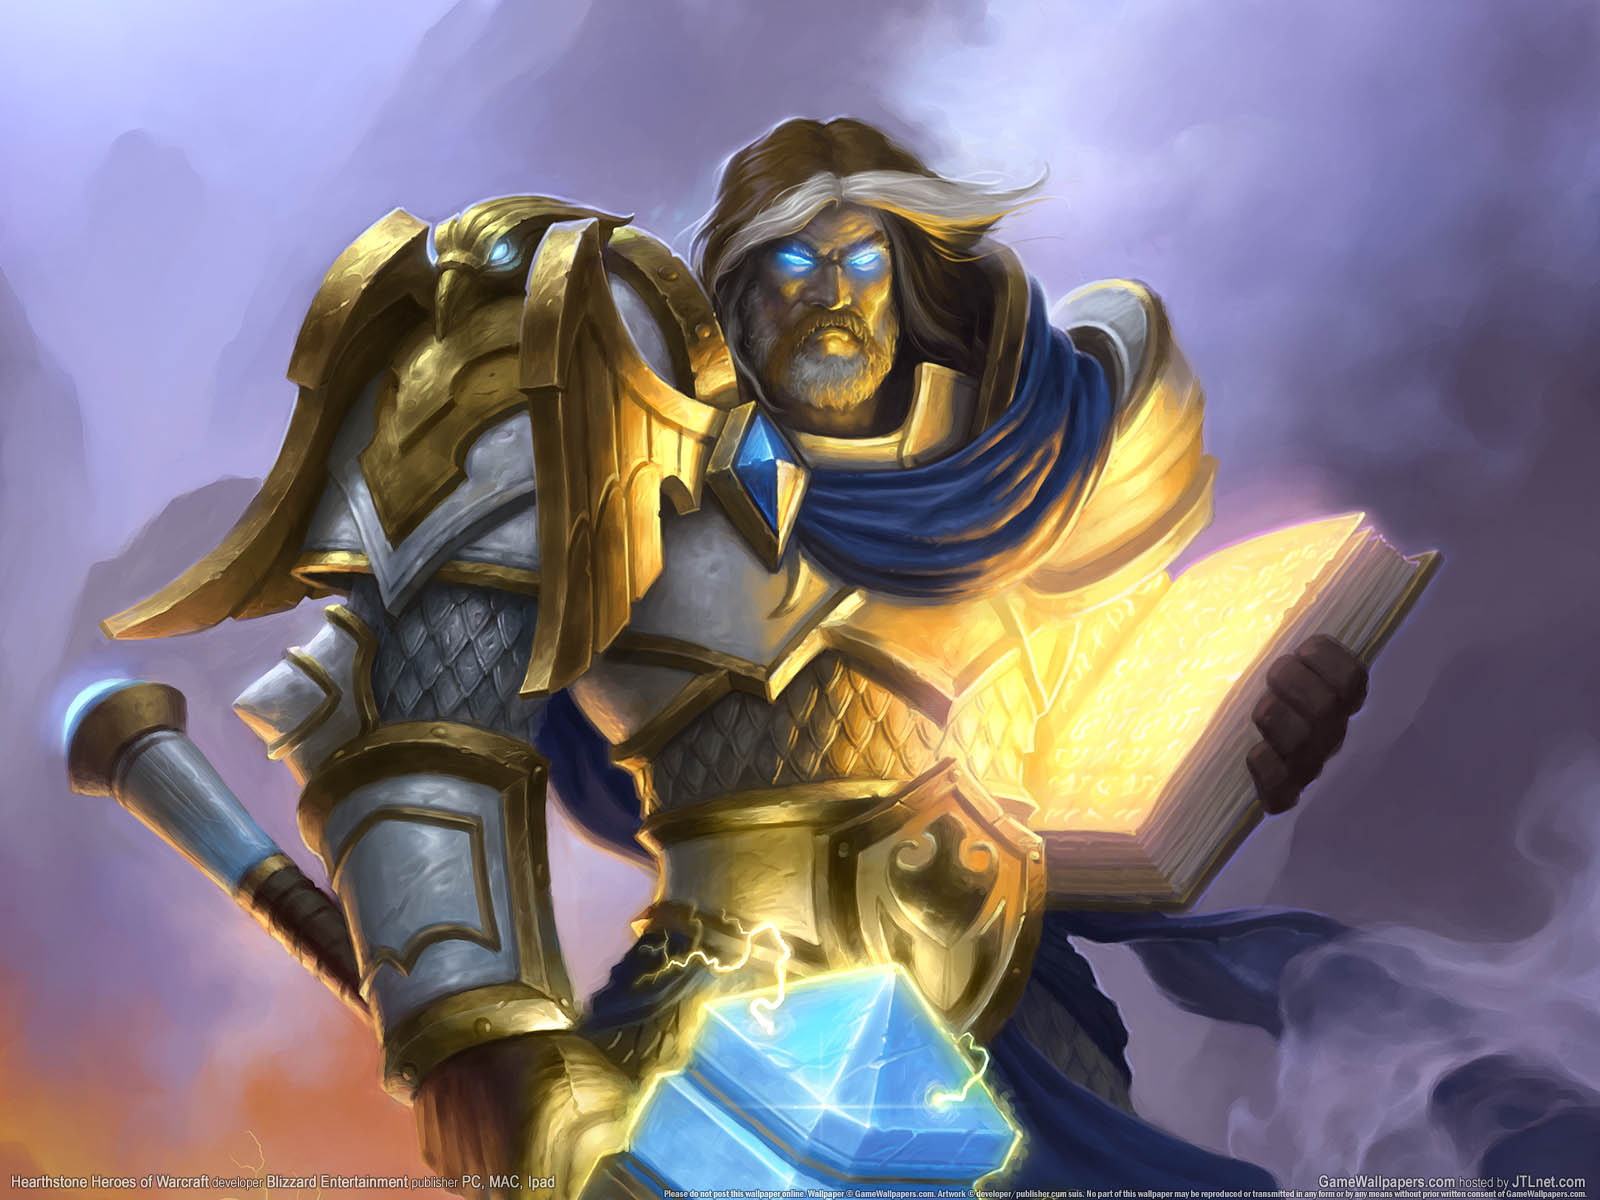 Hearthstone%3A Heroes of Warcraft wallpaper 01 1600x1200